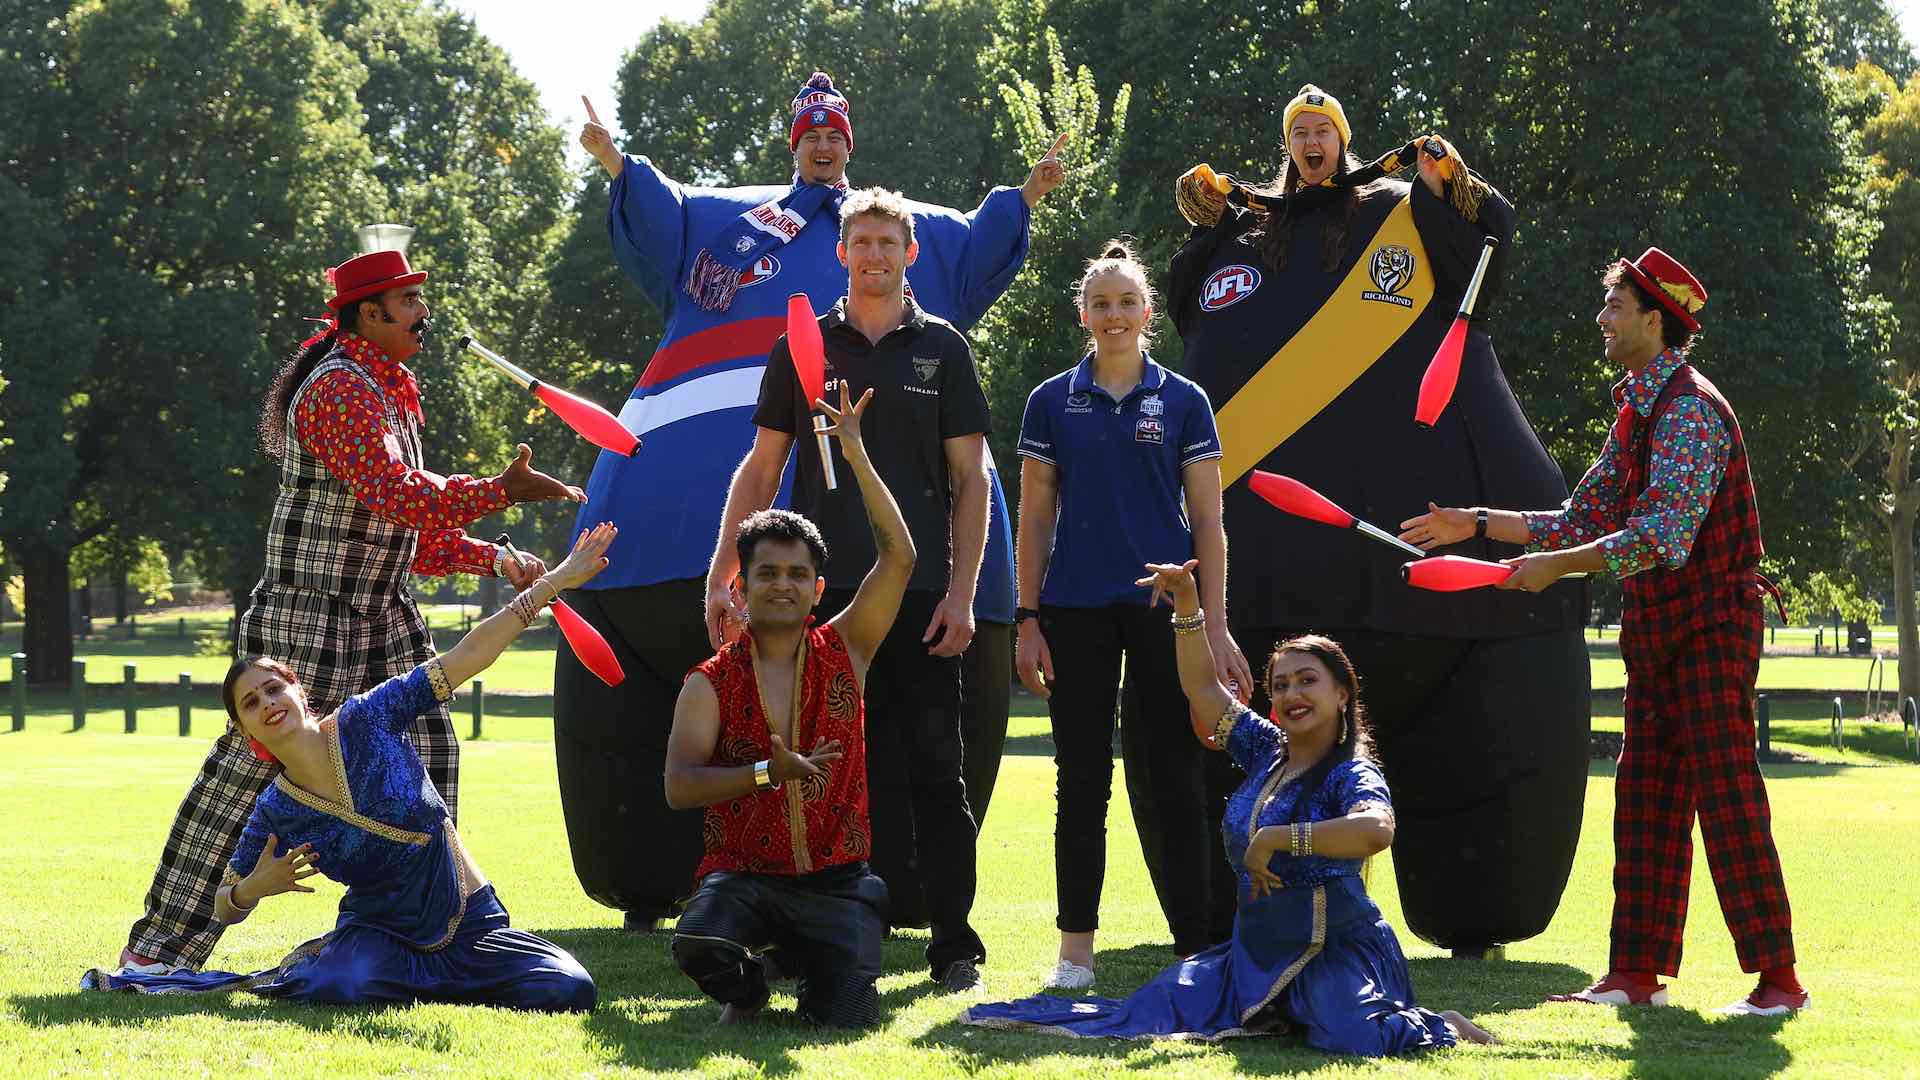 Hawthorn captain Ben McEvoy and North Melbourne Tasmanian Kangaroos AFLW player Emma King pose with entertainers during the AFL Festival of Footy Launch at Yarra Park on March 03, 2022 in Melbourne, Australia.